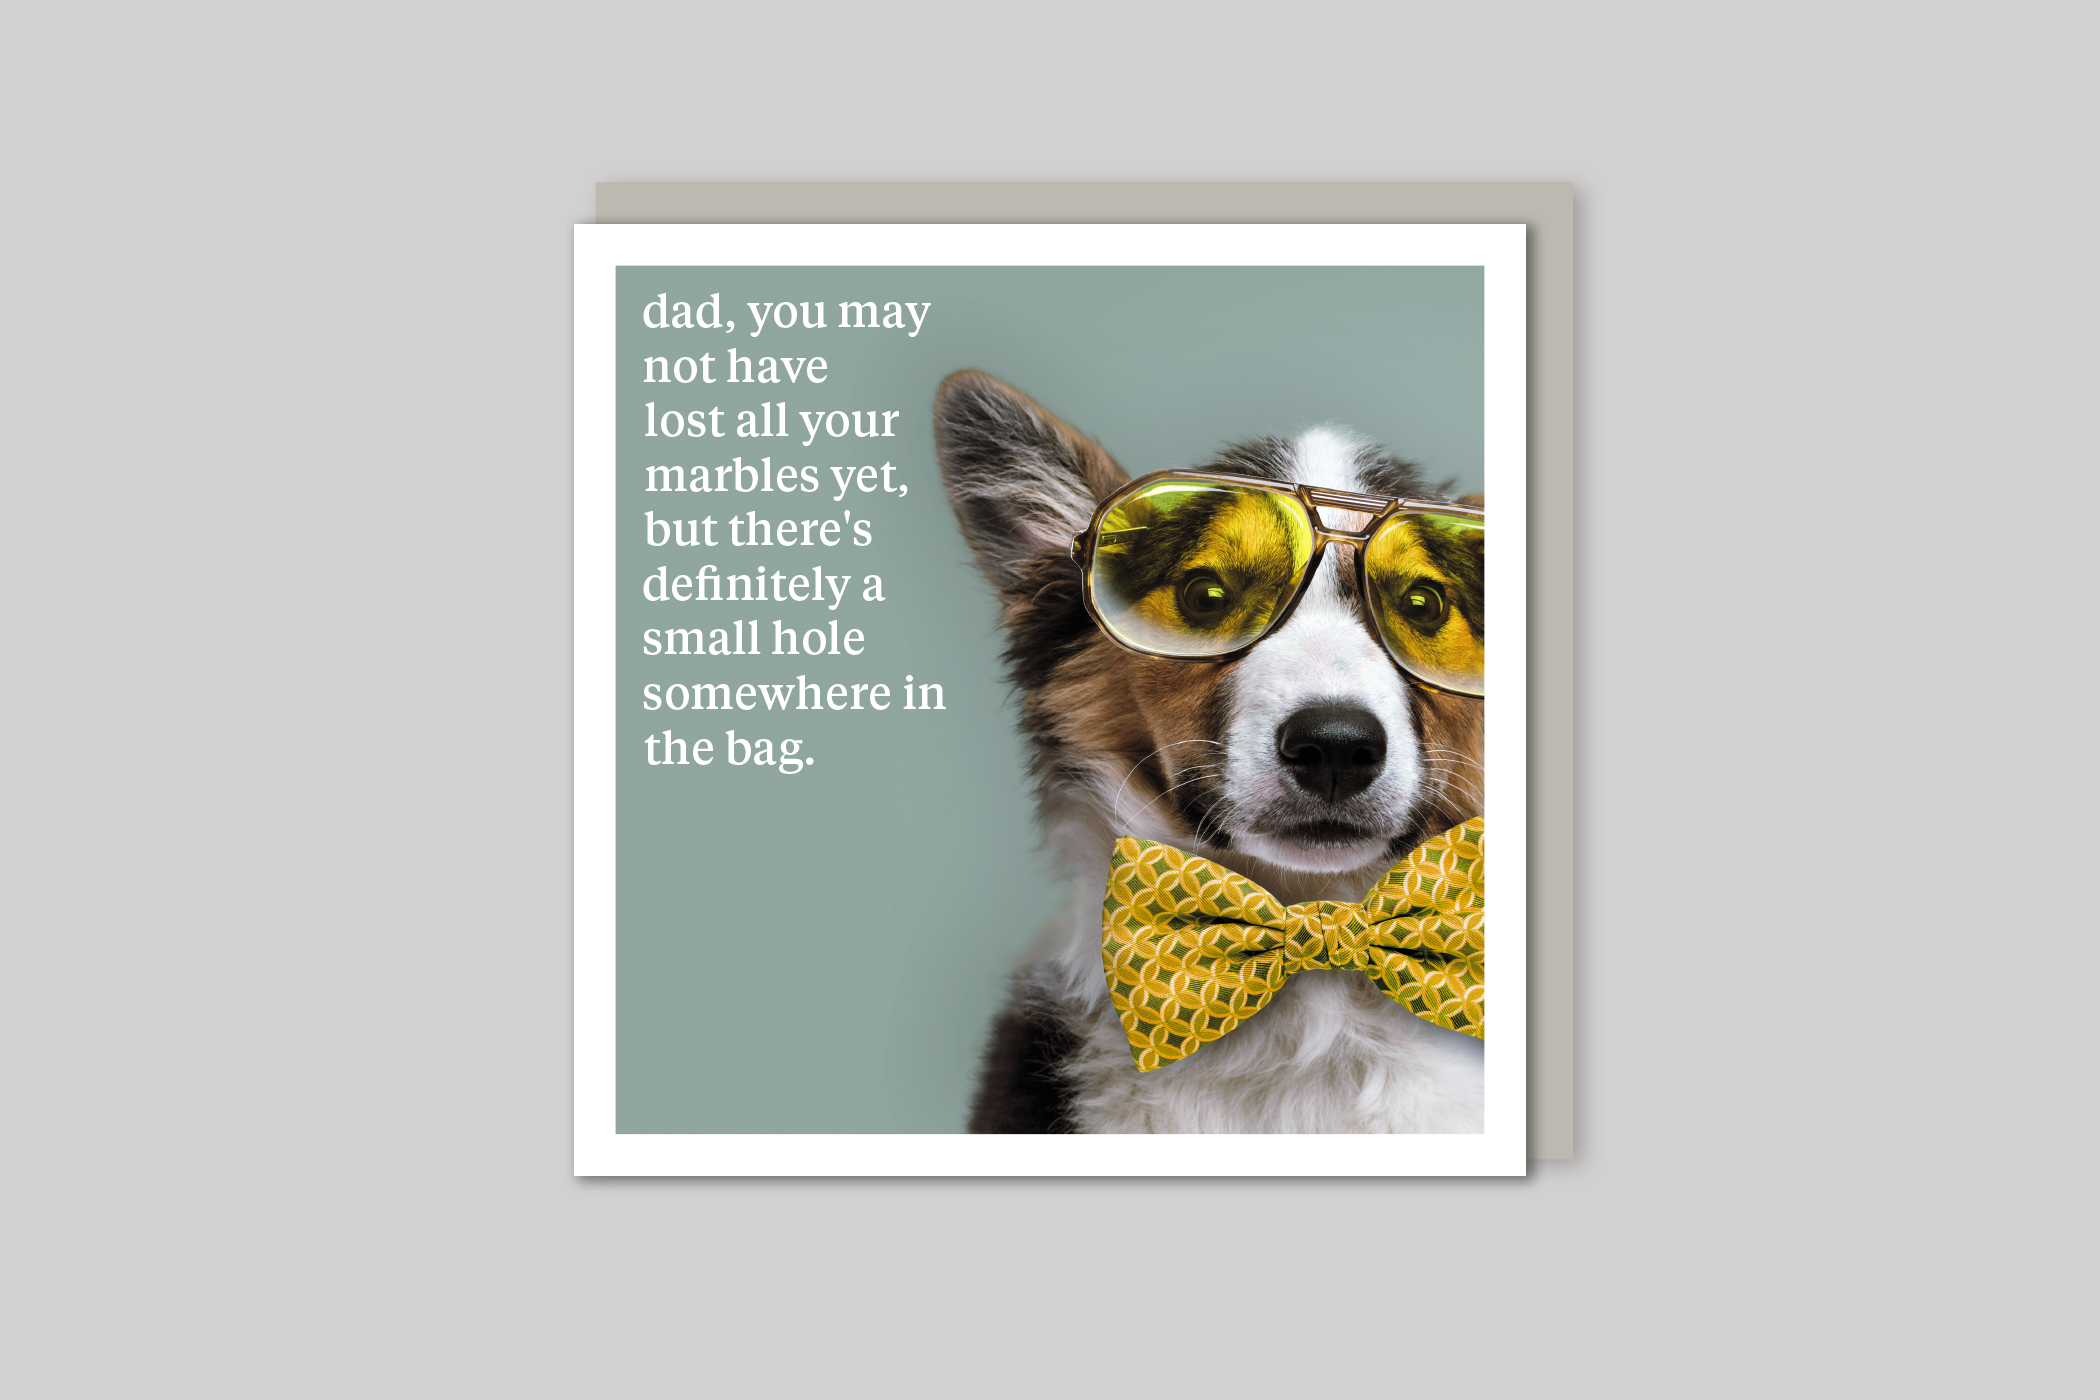 Lost Your Marbles dad card quirky animal portrait from Curious World range of greeting cards by Icon, back page.